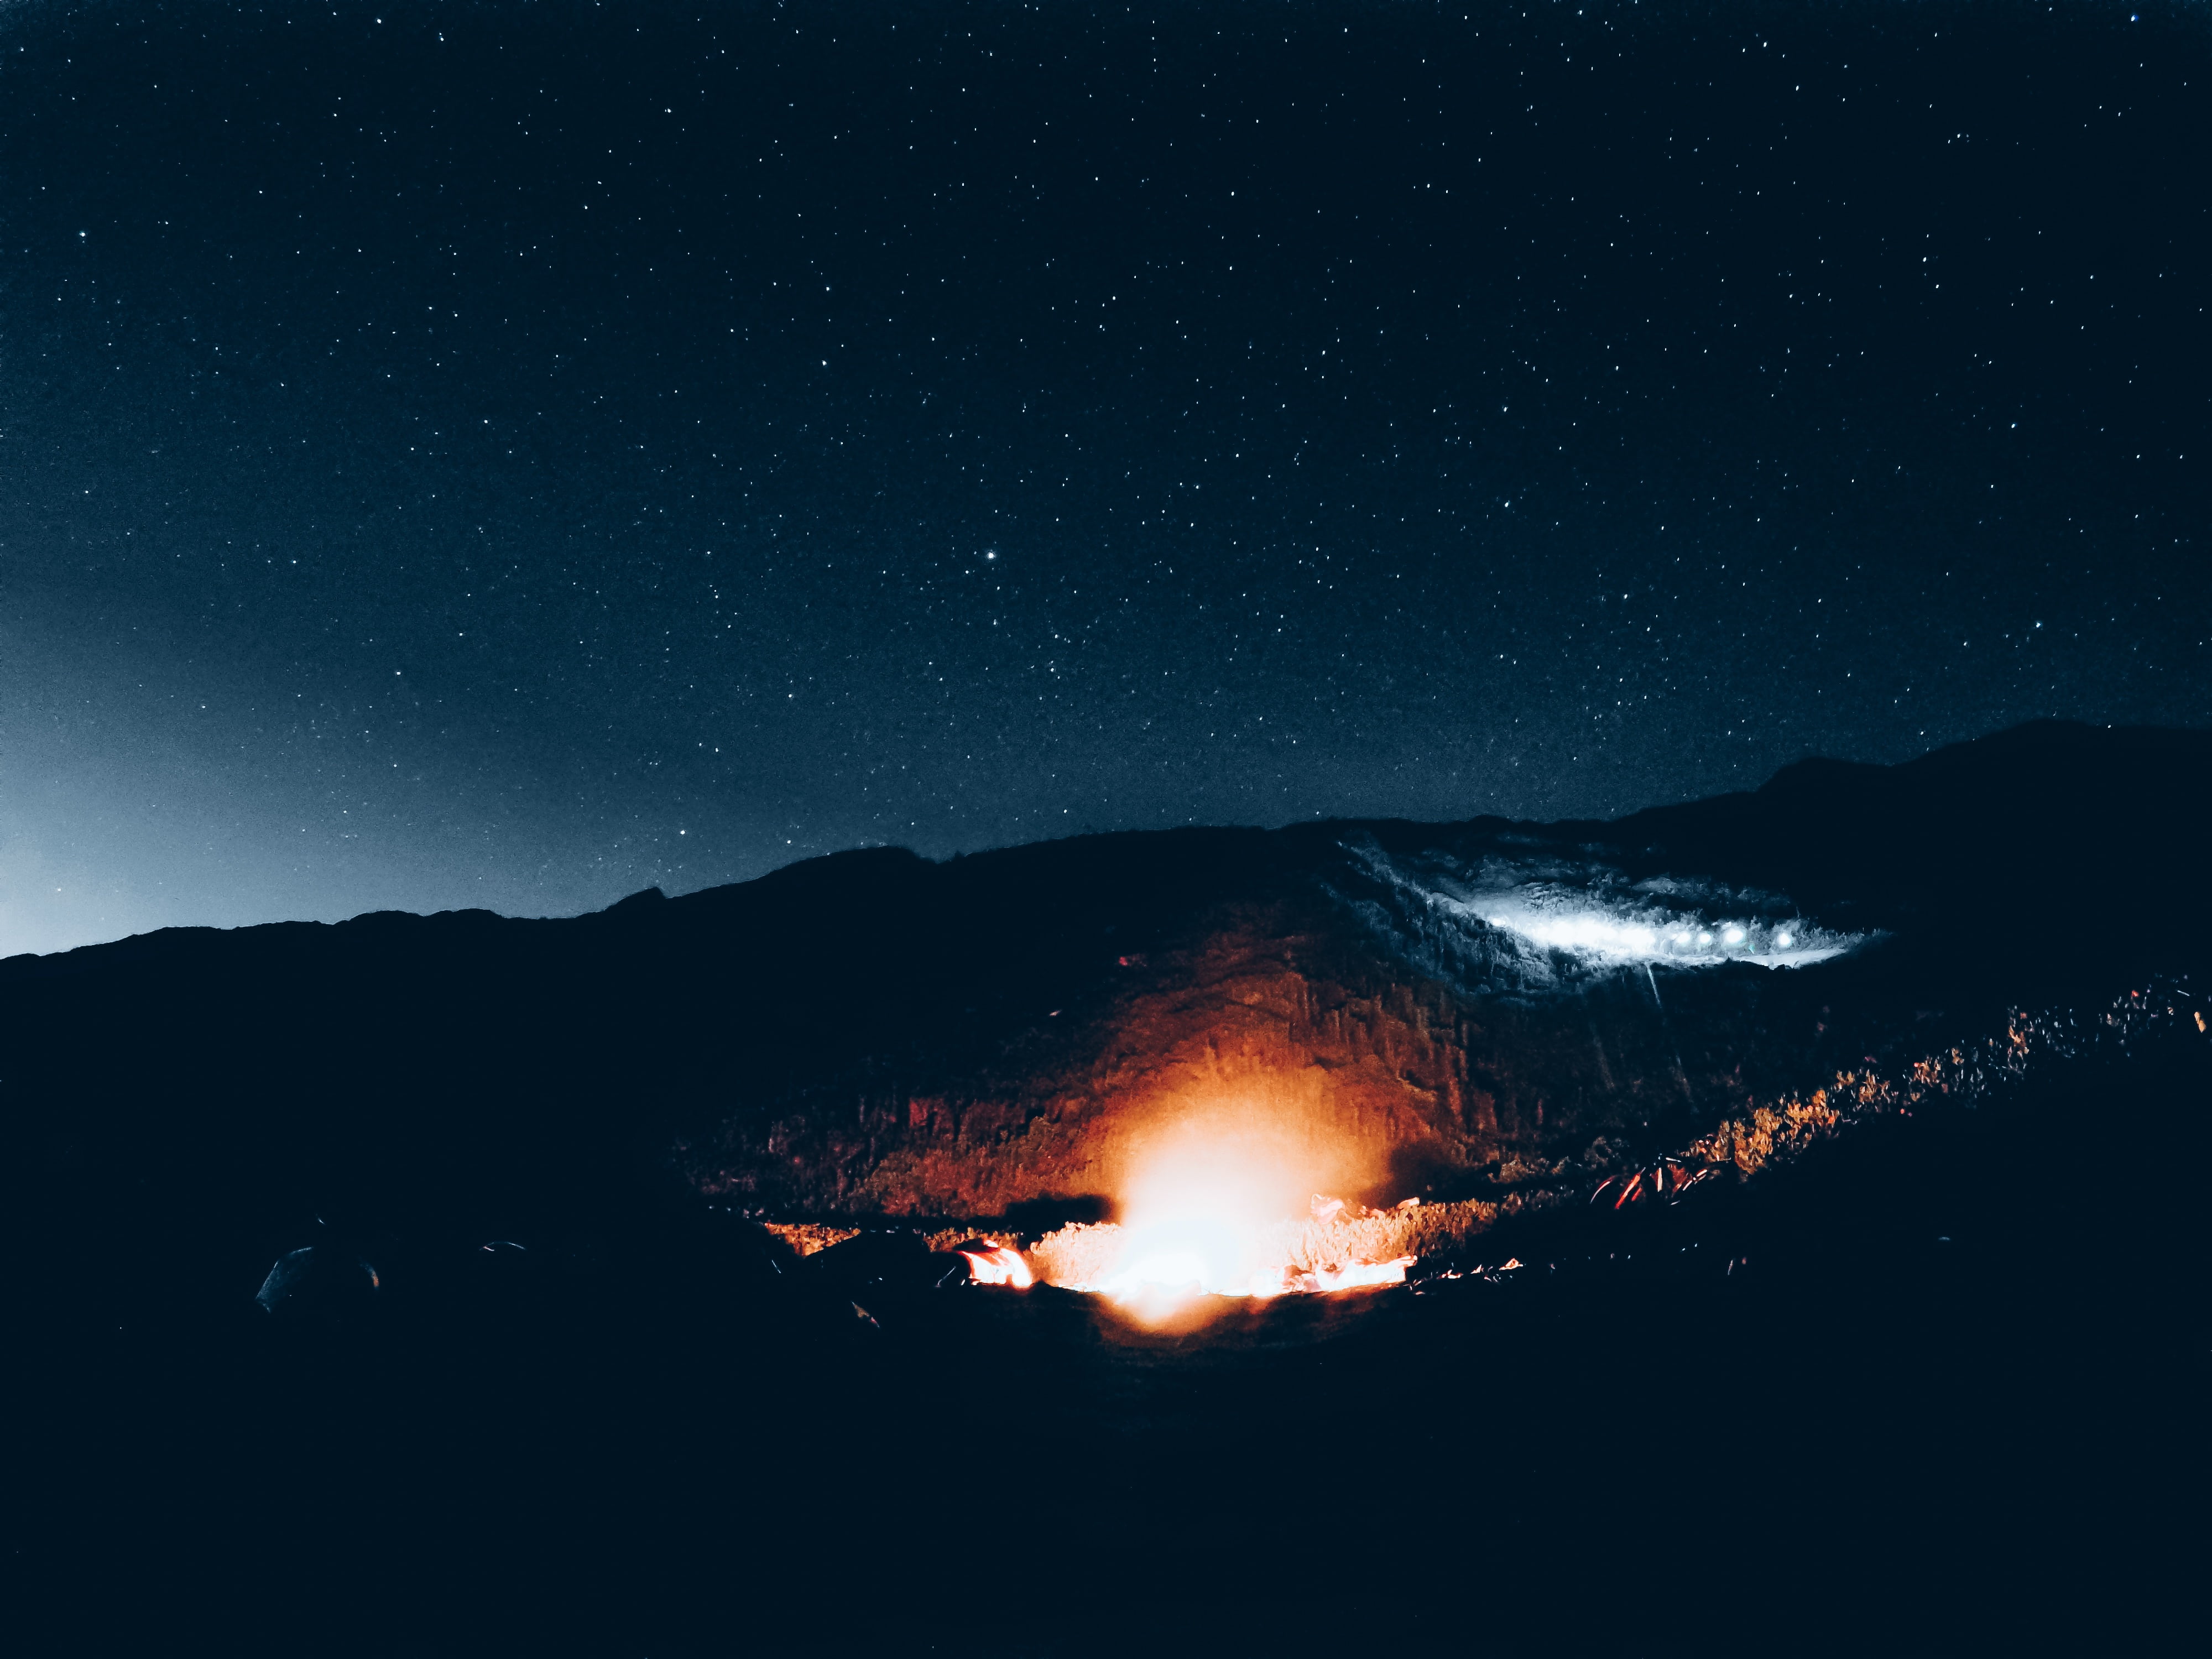 fire in the middle of mountains during nighttime